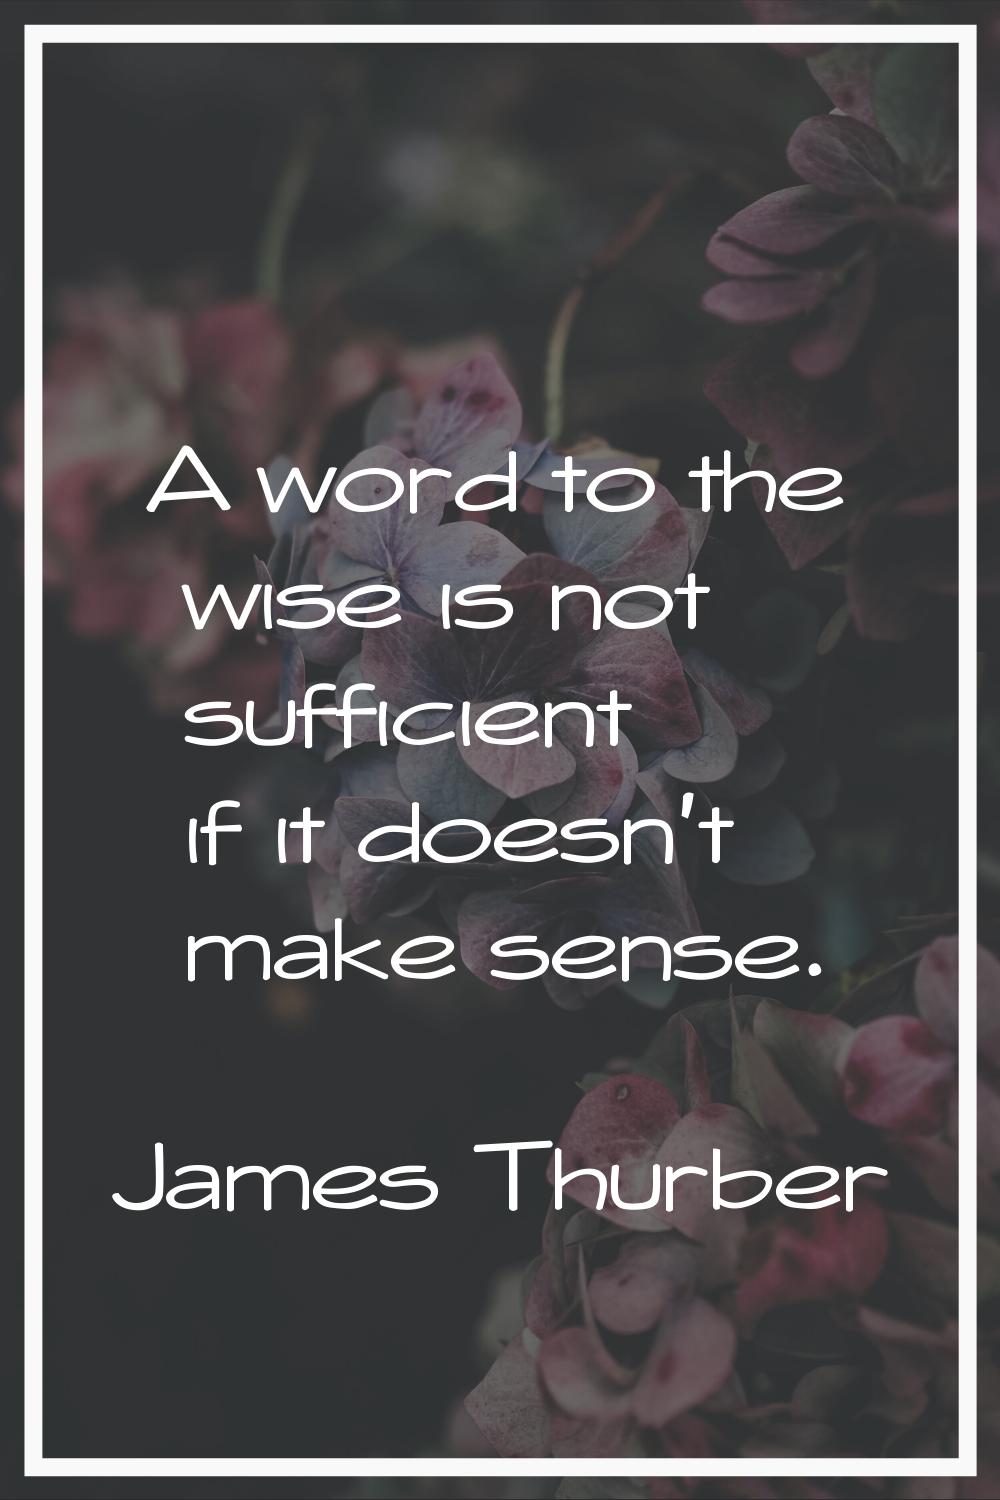 A word to the wise is not sufficient if it doesn't make sense.